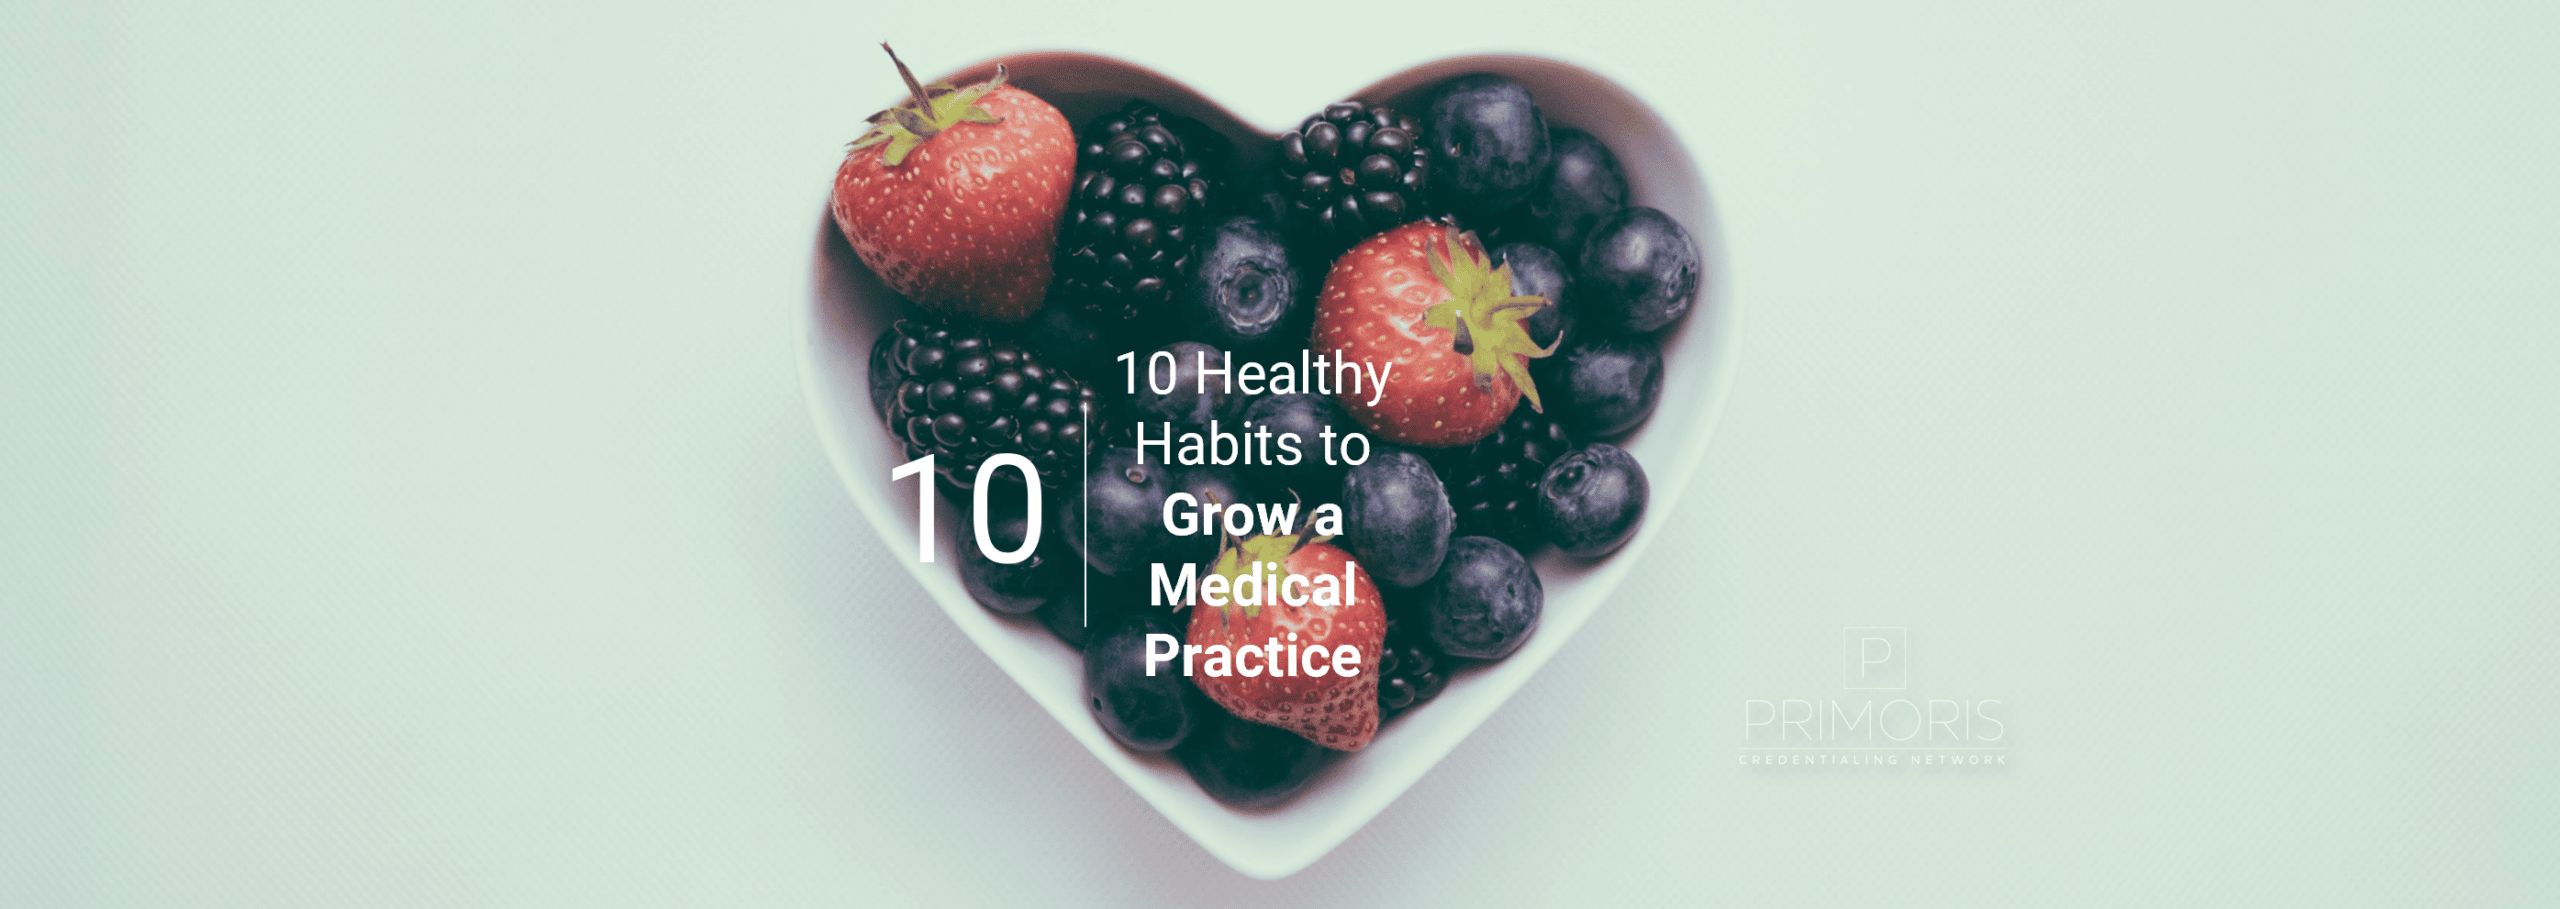 10 Healthy Habits To Grow A Medical Practice